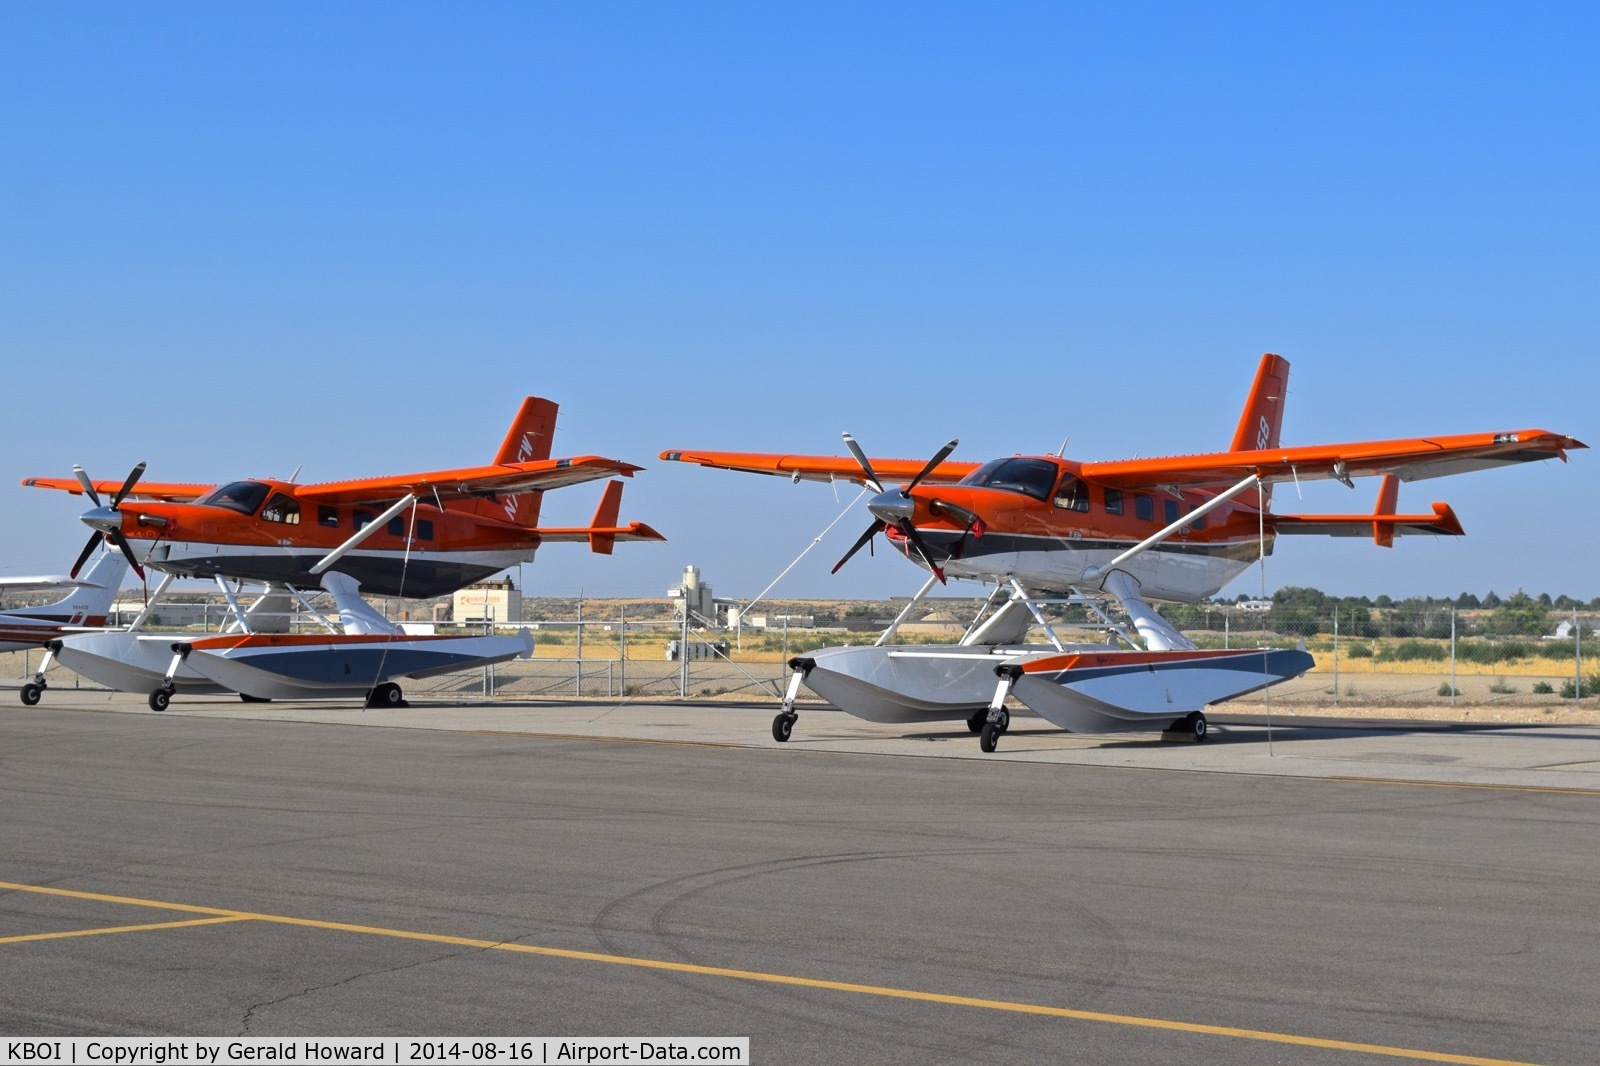 Boise Air Terminal/gowen Fld Airport (BOI) - Two Quest Kodiak 100s belonging to the Fish & Wildlife Service, U.S. Dept. of the Interior parked for maintenance.